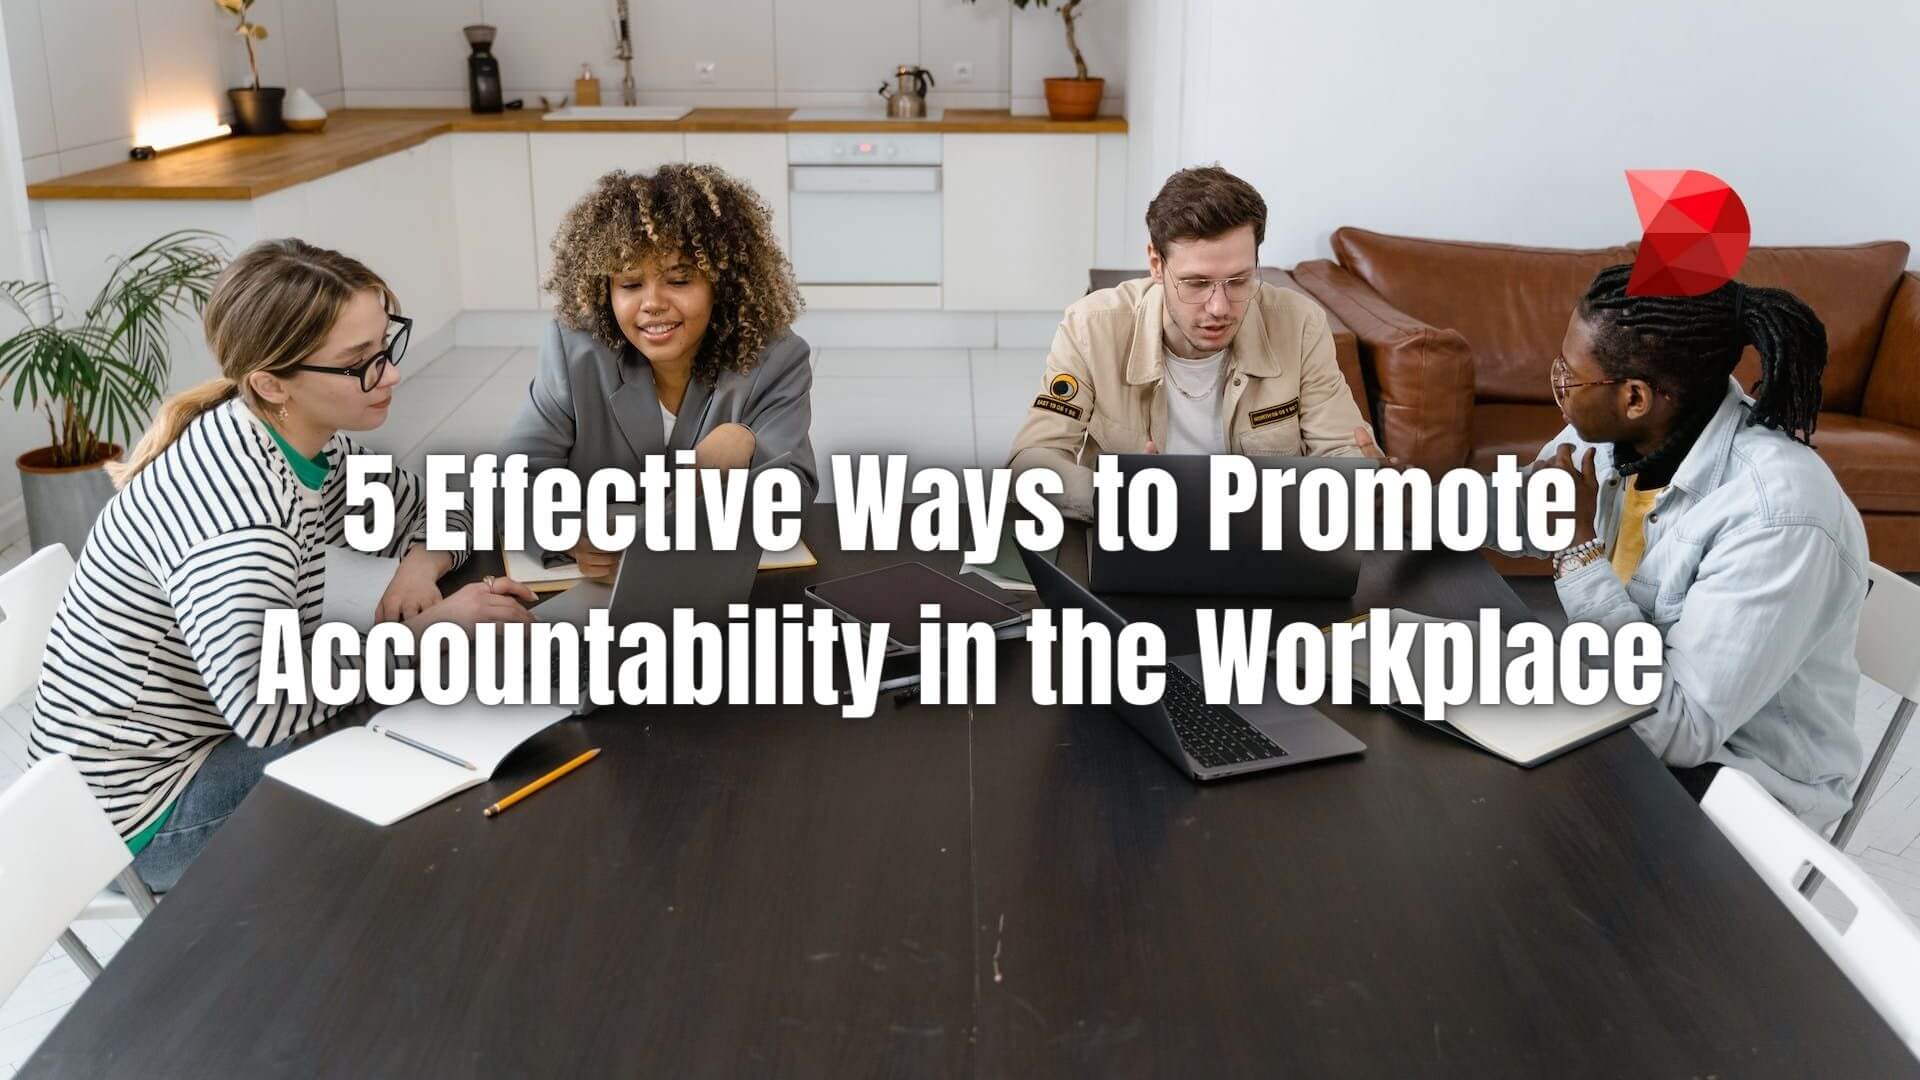 Empower your team and boost productivity! Click here to discover the top 5 effective ways to promote accountability in the workplace.